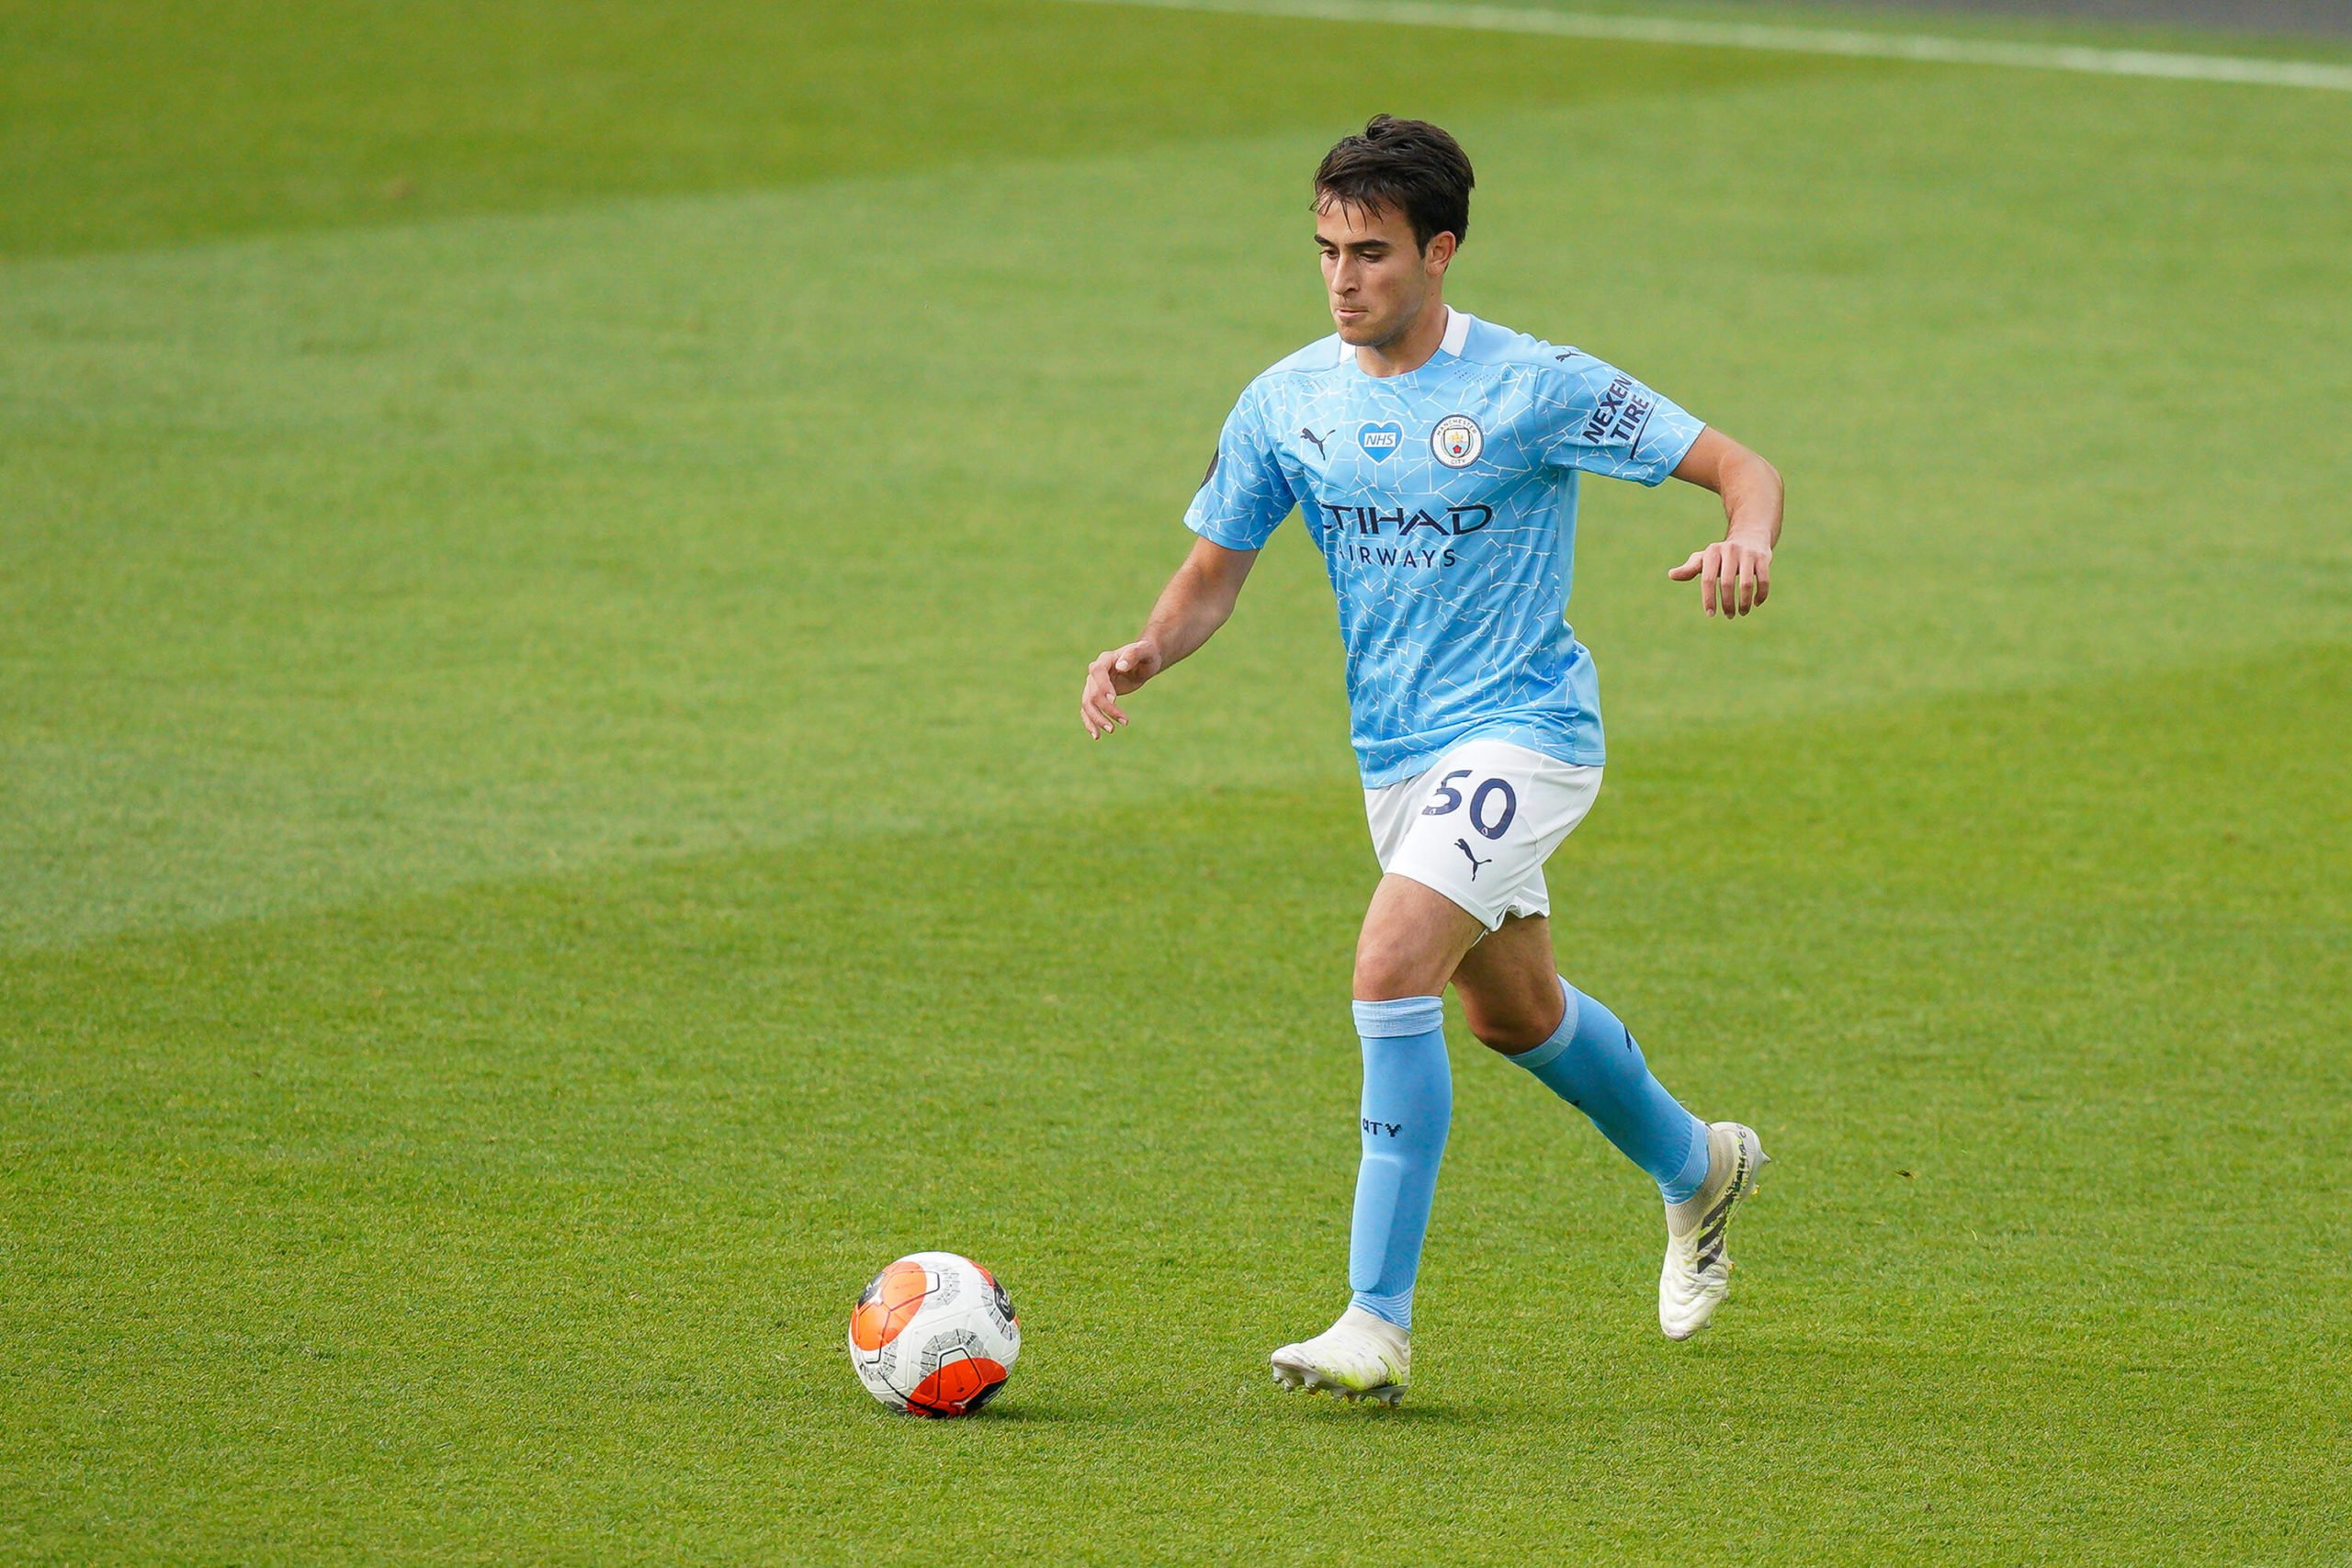 Barcelona confirm the capture of Eric Garcia who is seen in the photo